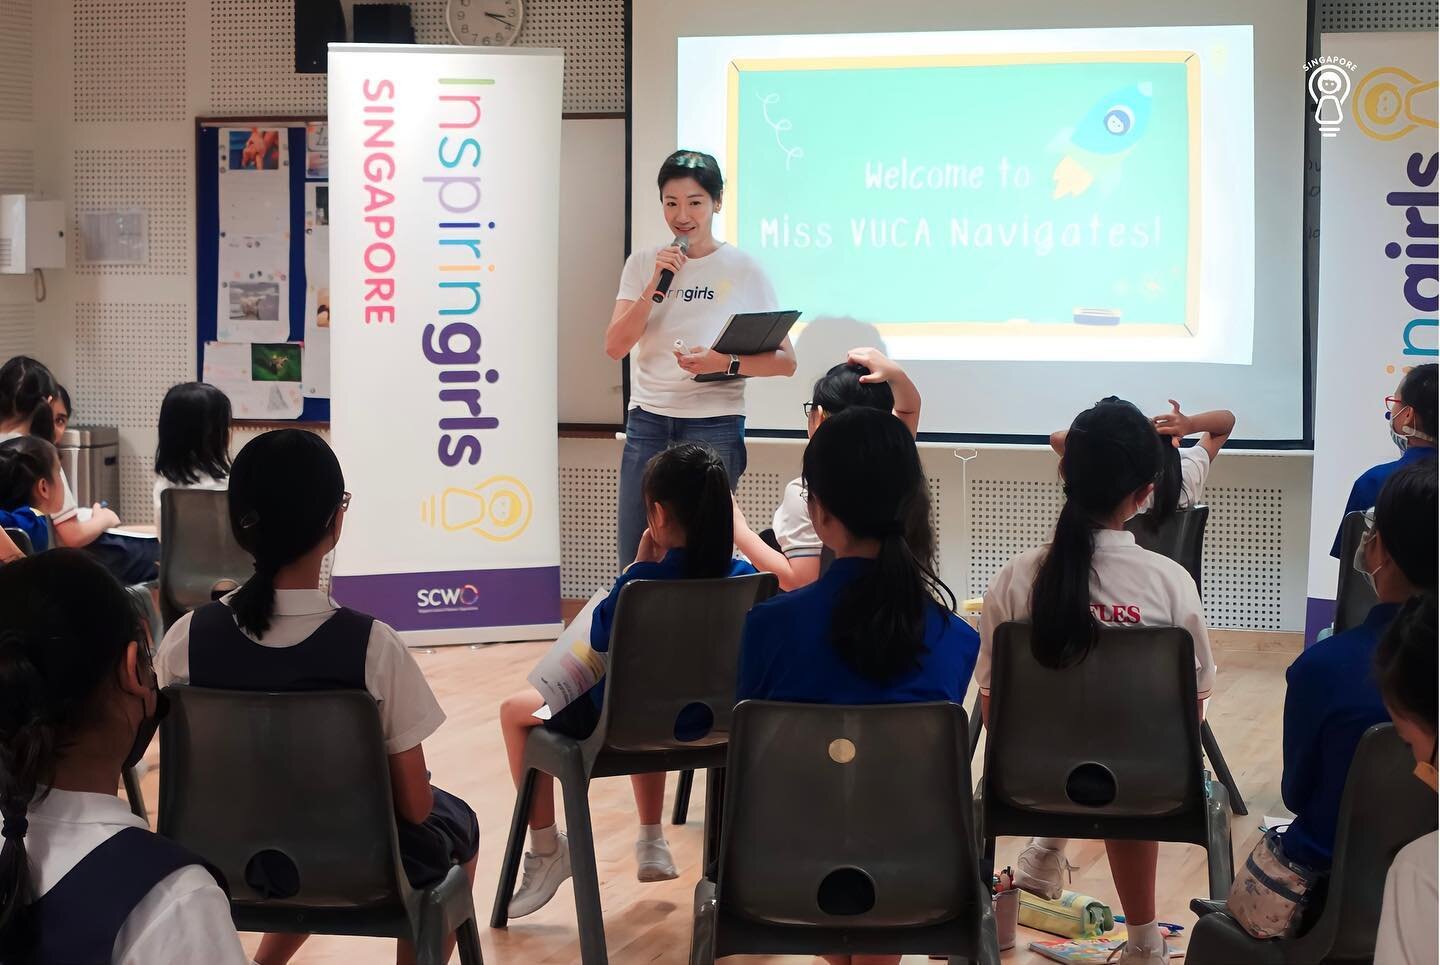 Last Wednesday, we ran a workshop and speed networking session introducing 45 girls to 8 amazing role models. Role models from different industries and backgrounds came to share more about their personal journeys and impart an important message of re